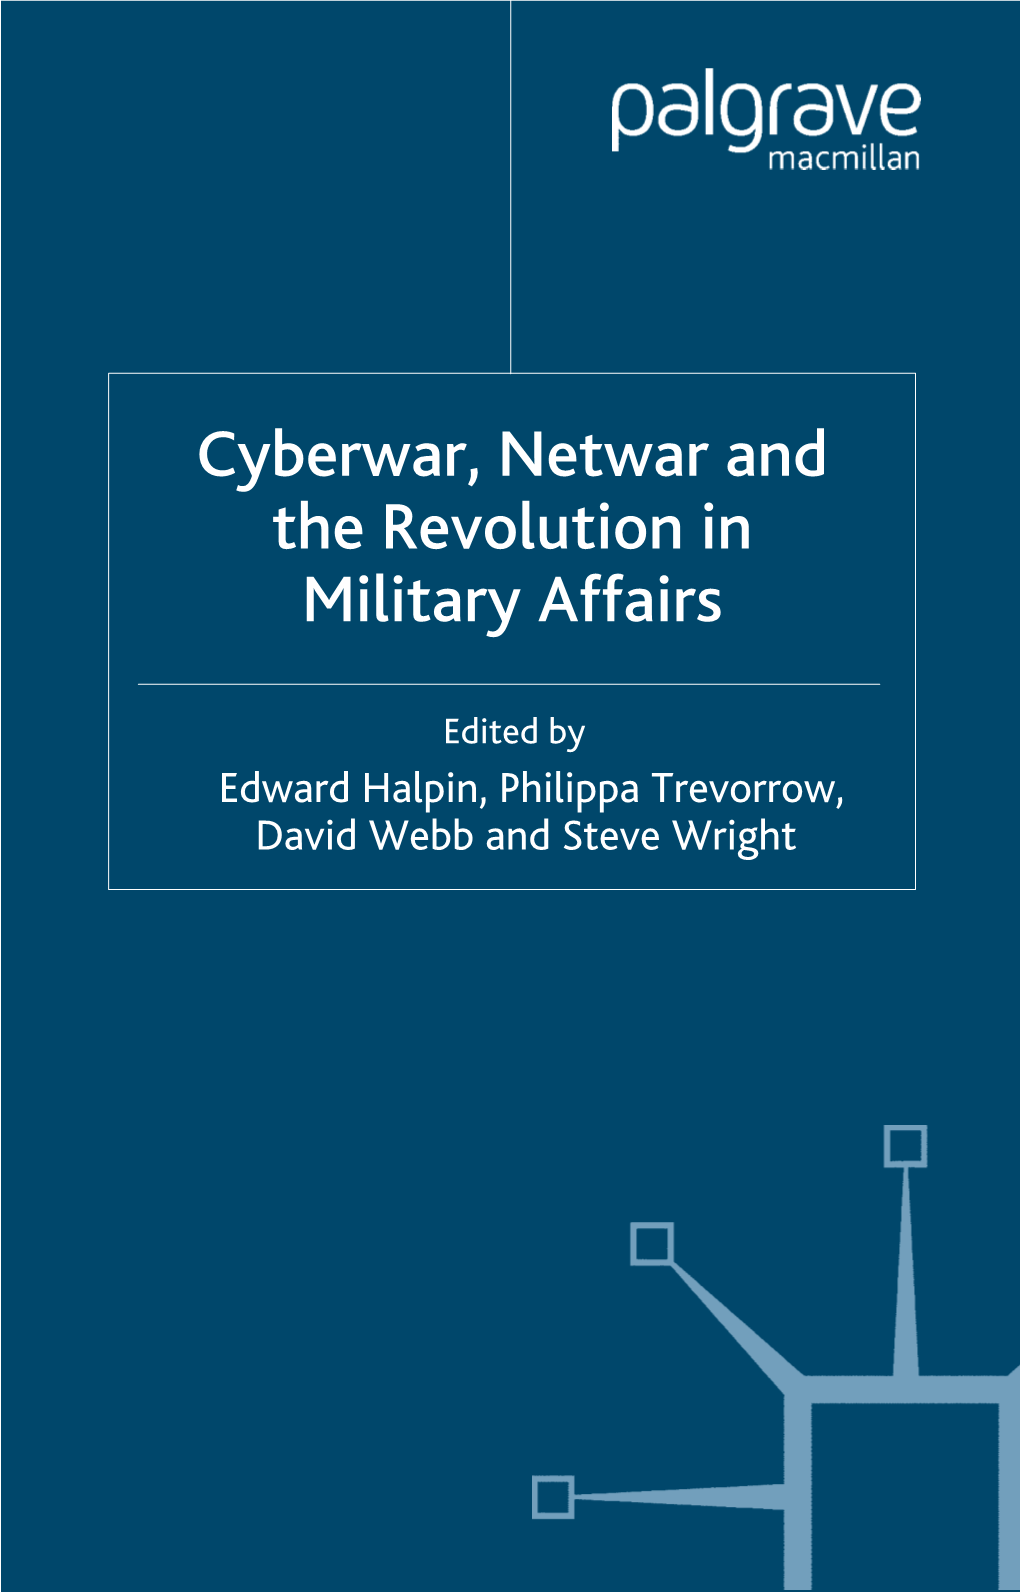 Cyberwar, Netwar and the Revolution in Military Affairs